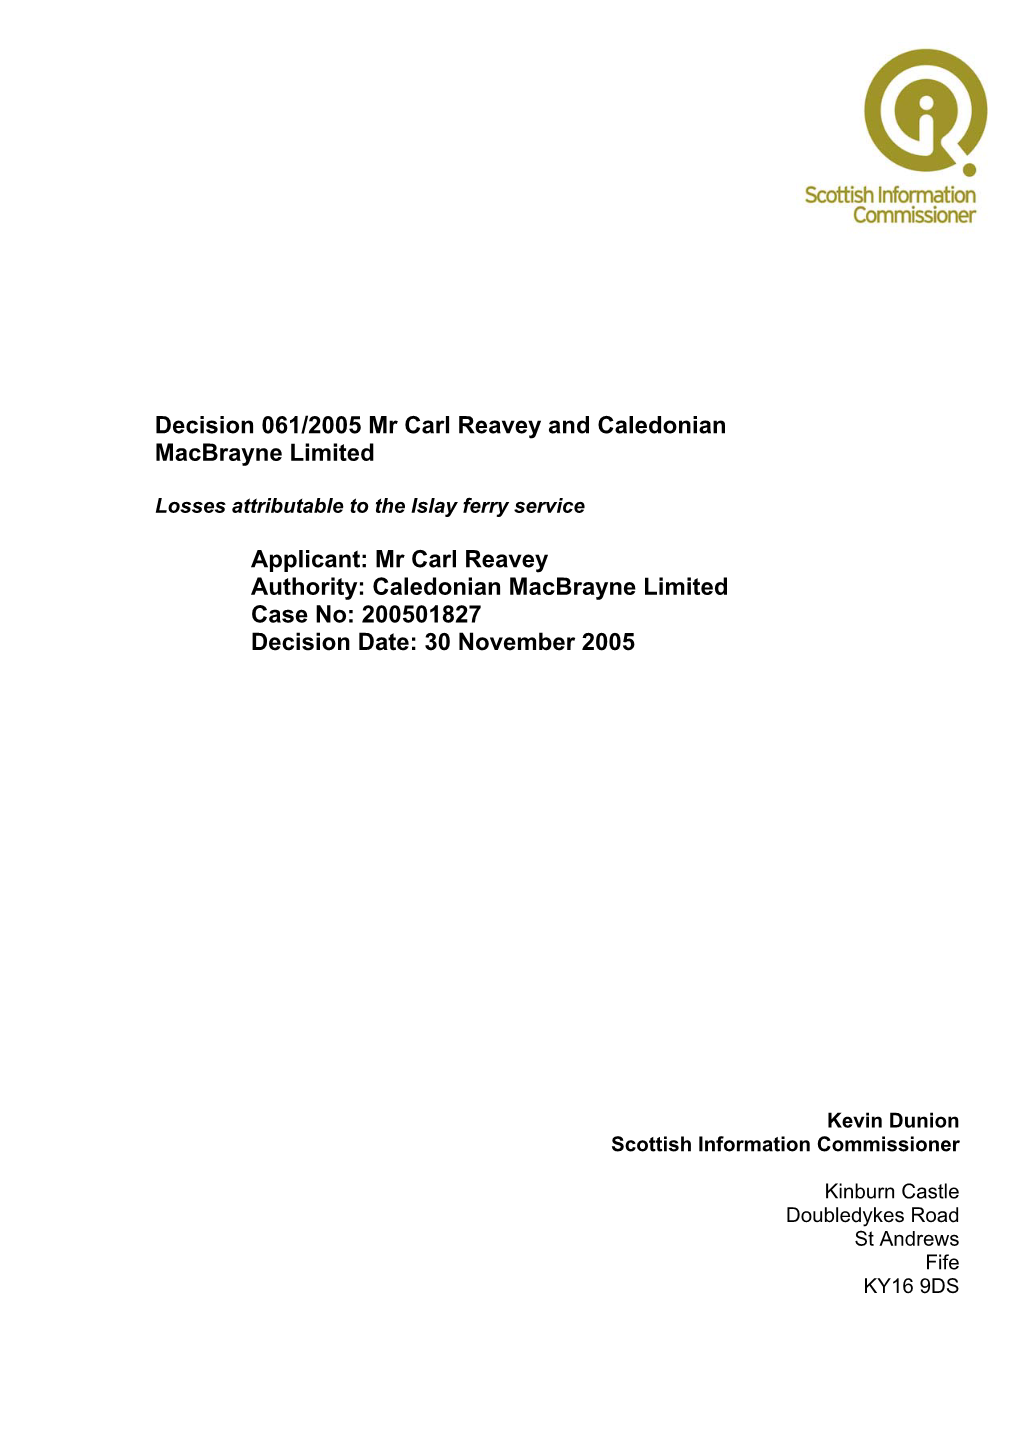 Decision 061/2005 Mr Carl Reavey and Caledonian Macbrayne Limited